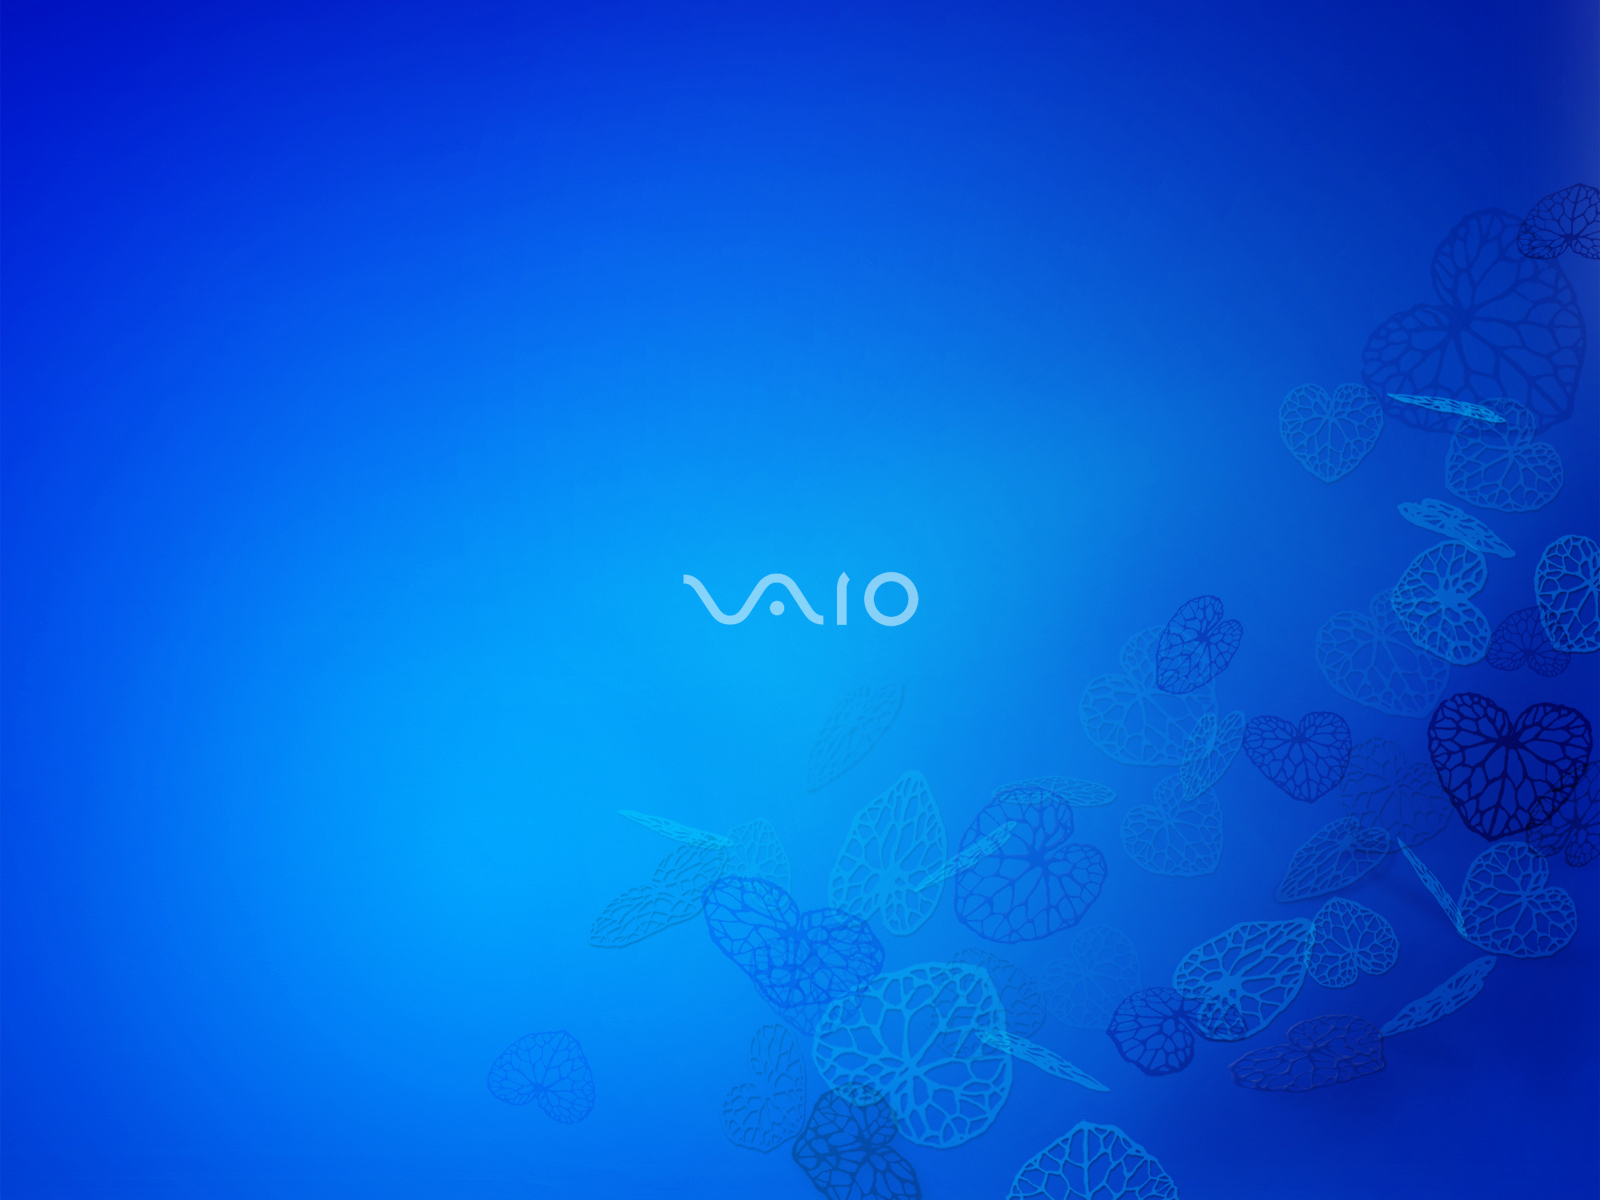 Free Download Sony Vaio Wallpapers Hd Wallpapers 1600x10 For Your Desktop Mobile Tablet Explore 49 Sony Vaio Wallpaper Backgrounds Sony Vaio Wallpapers Sony Vaio Wallpaper 1366x768 Sony Vaio Wallpaper 1080p